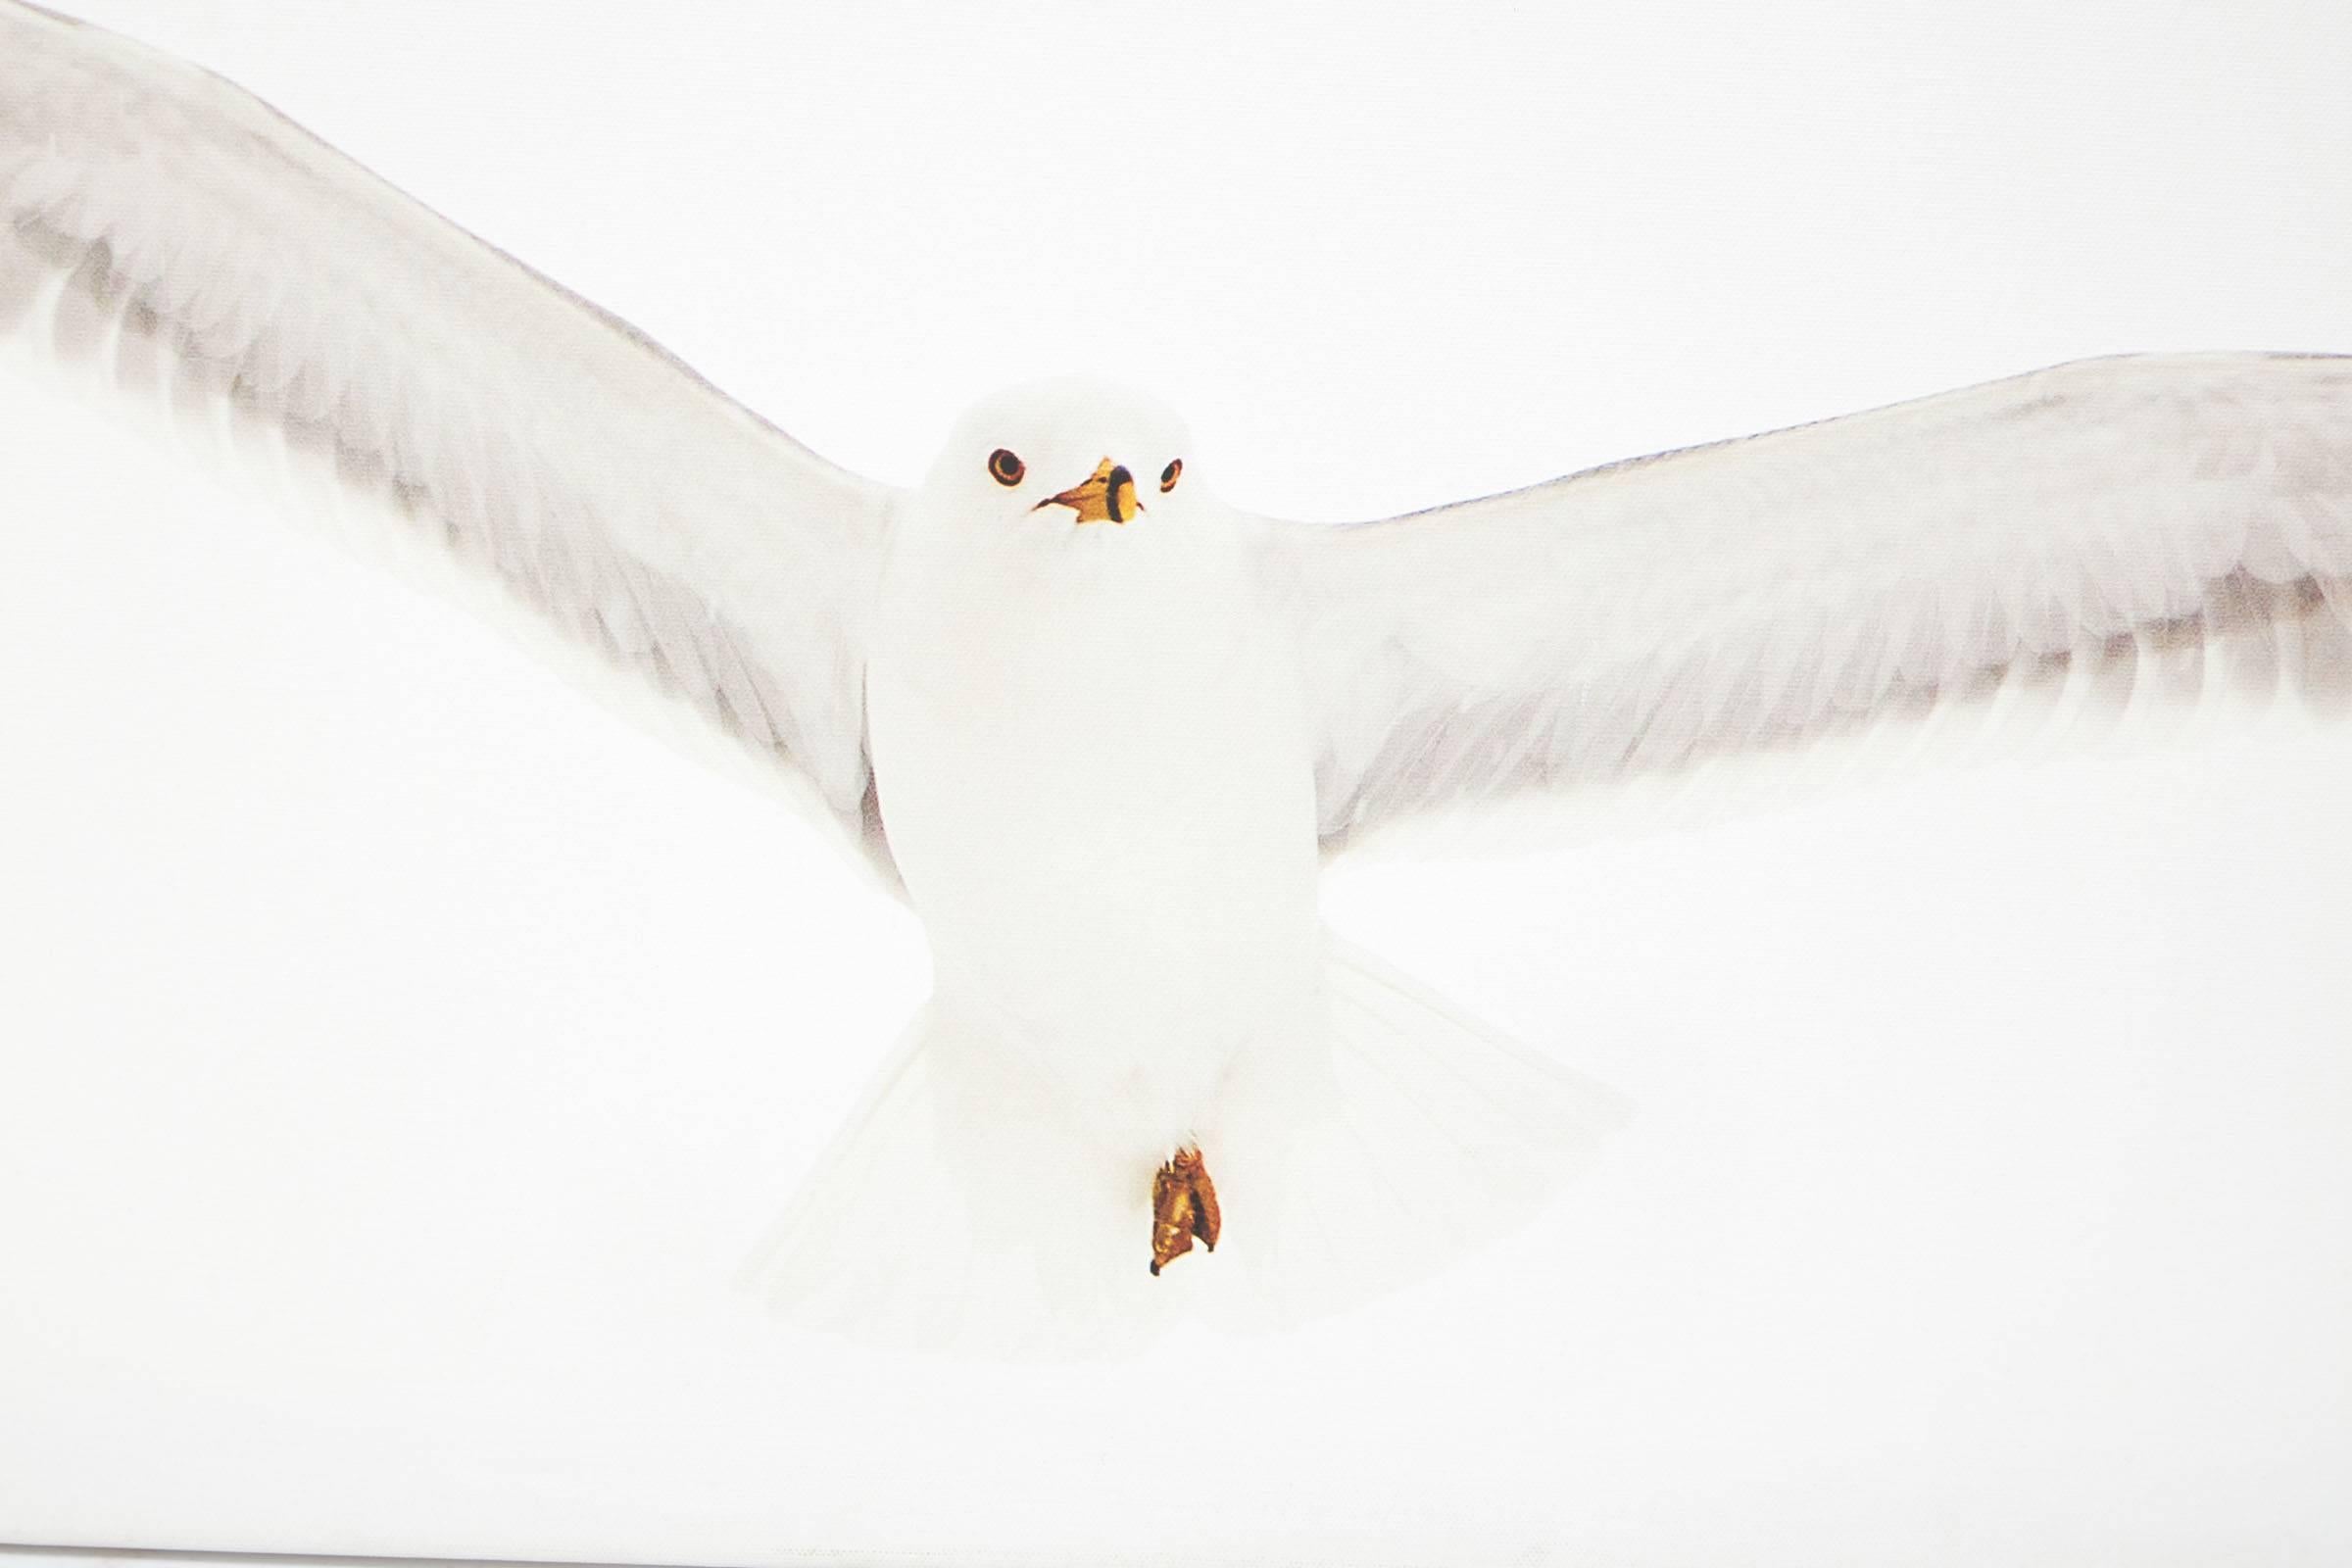 21st century seagull photograph by Janet Mesic-Mackie
Janet Mesic-Mackie is a Chicago based photographer who shoots interiors for shelter publications worldwide. Additionally, she works as an art photographer using themed series such as this